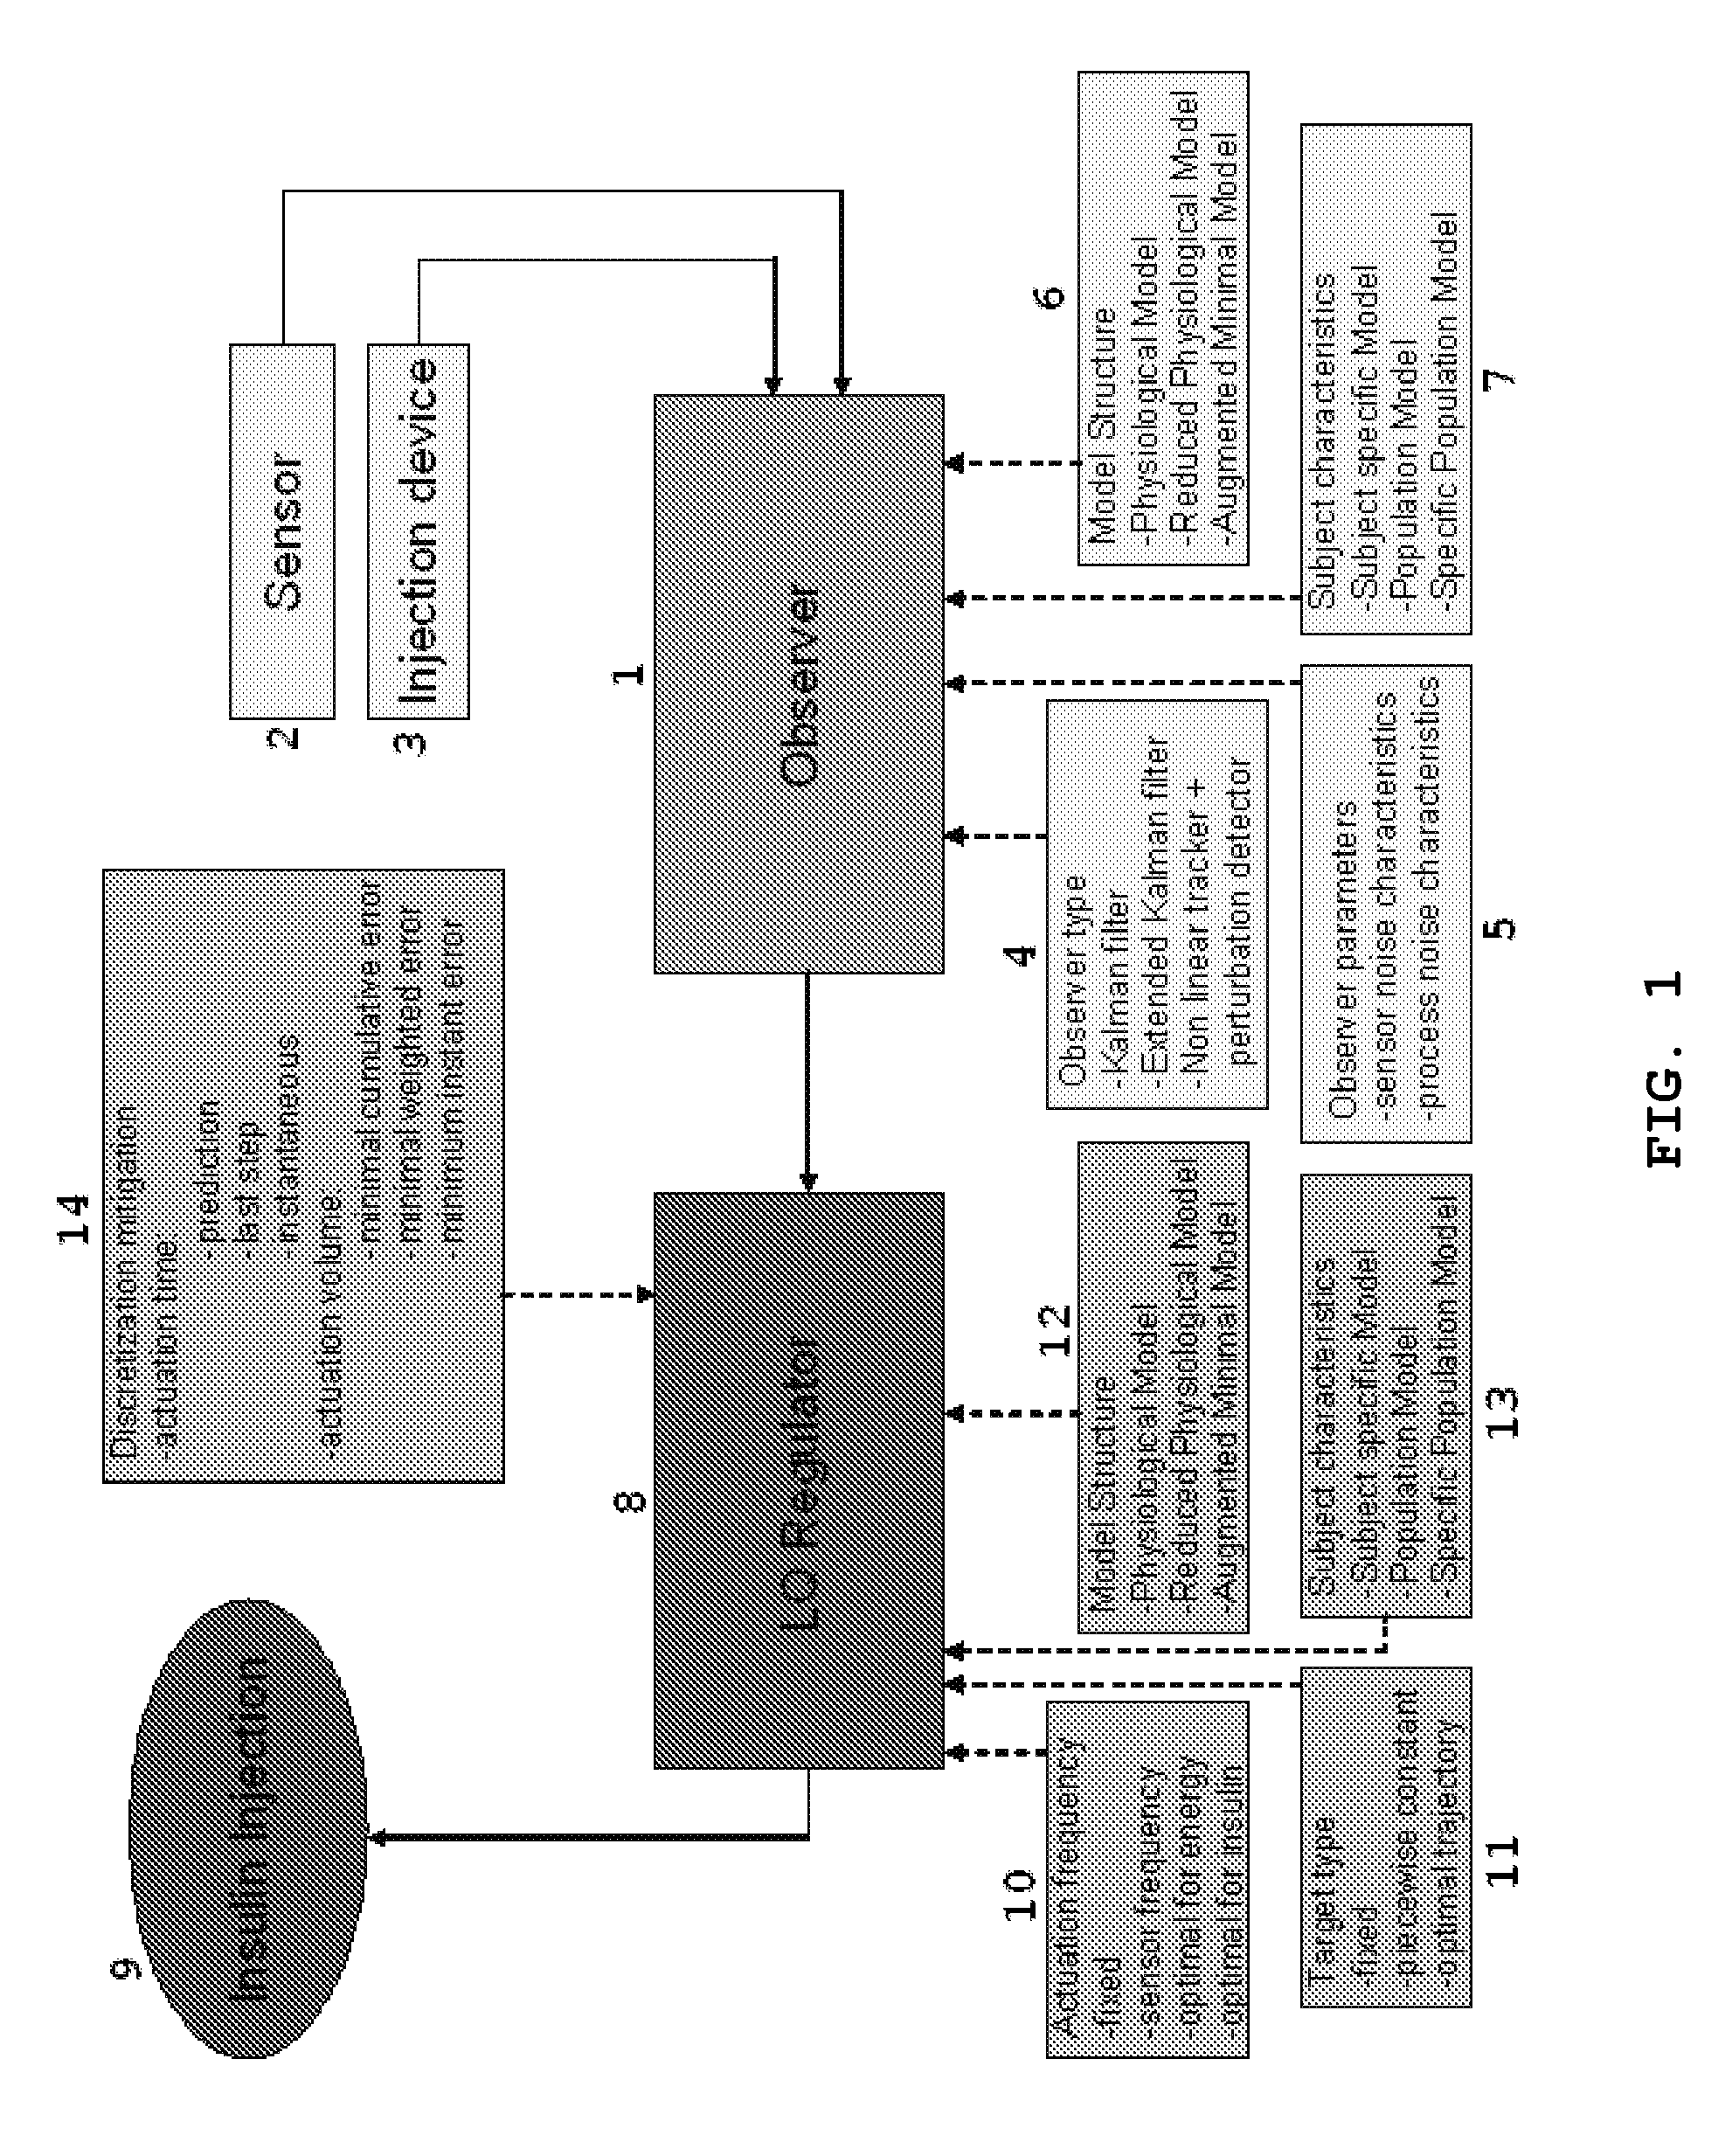 LQG Artificial Pancreas Control System and Related Method